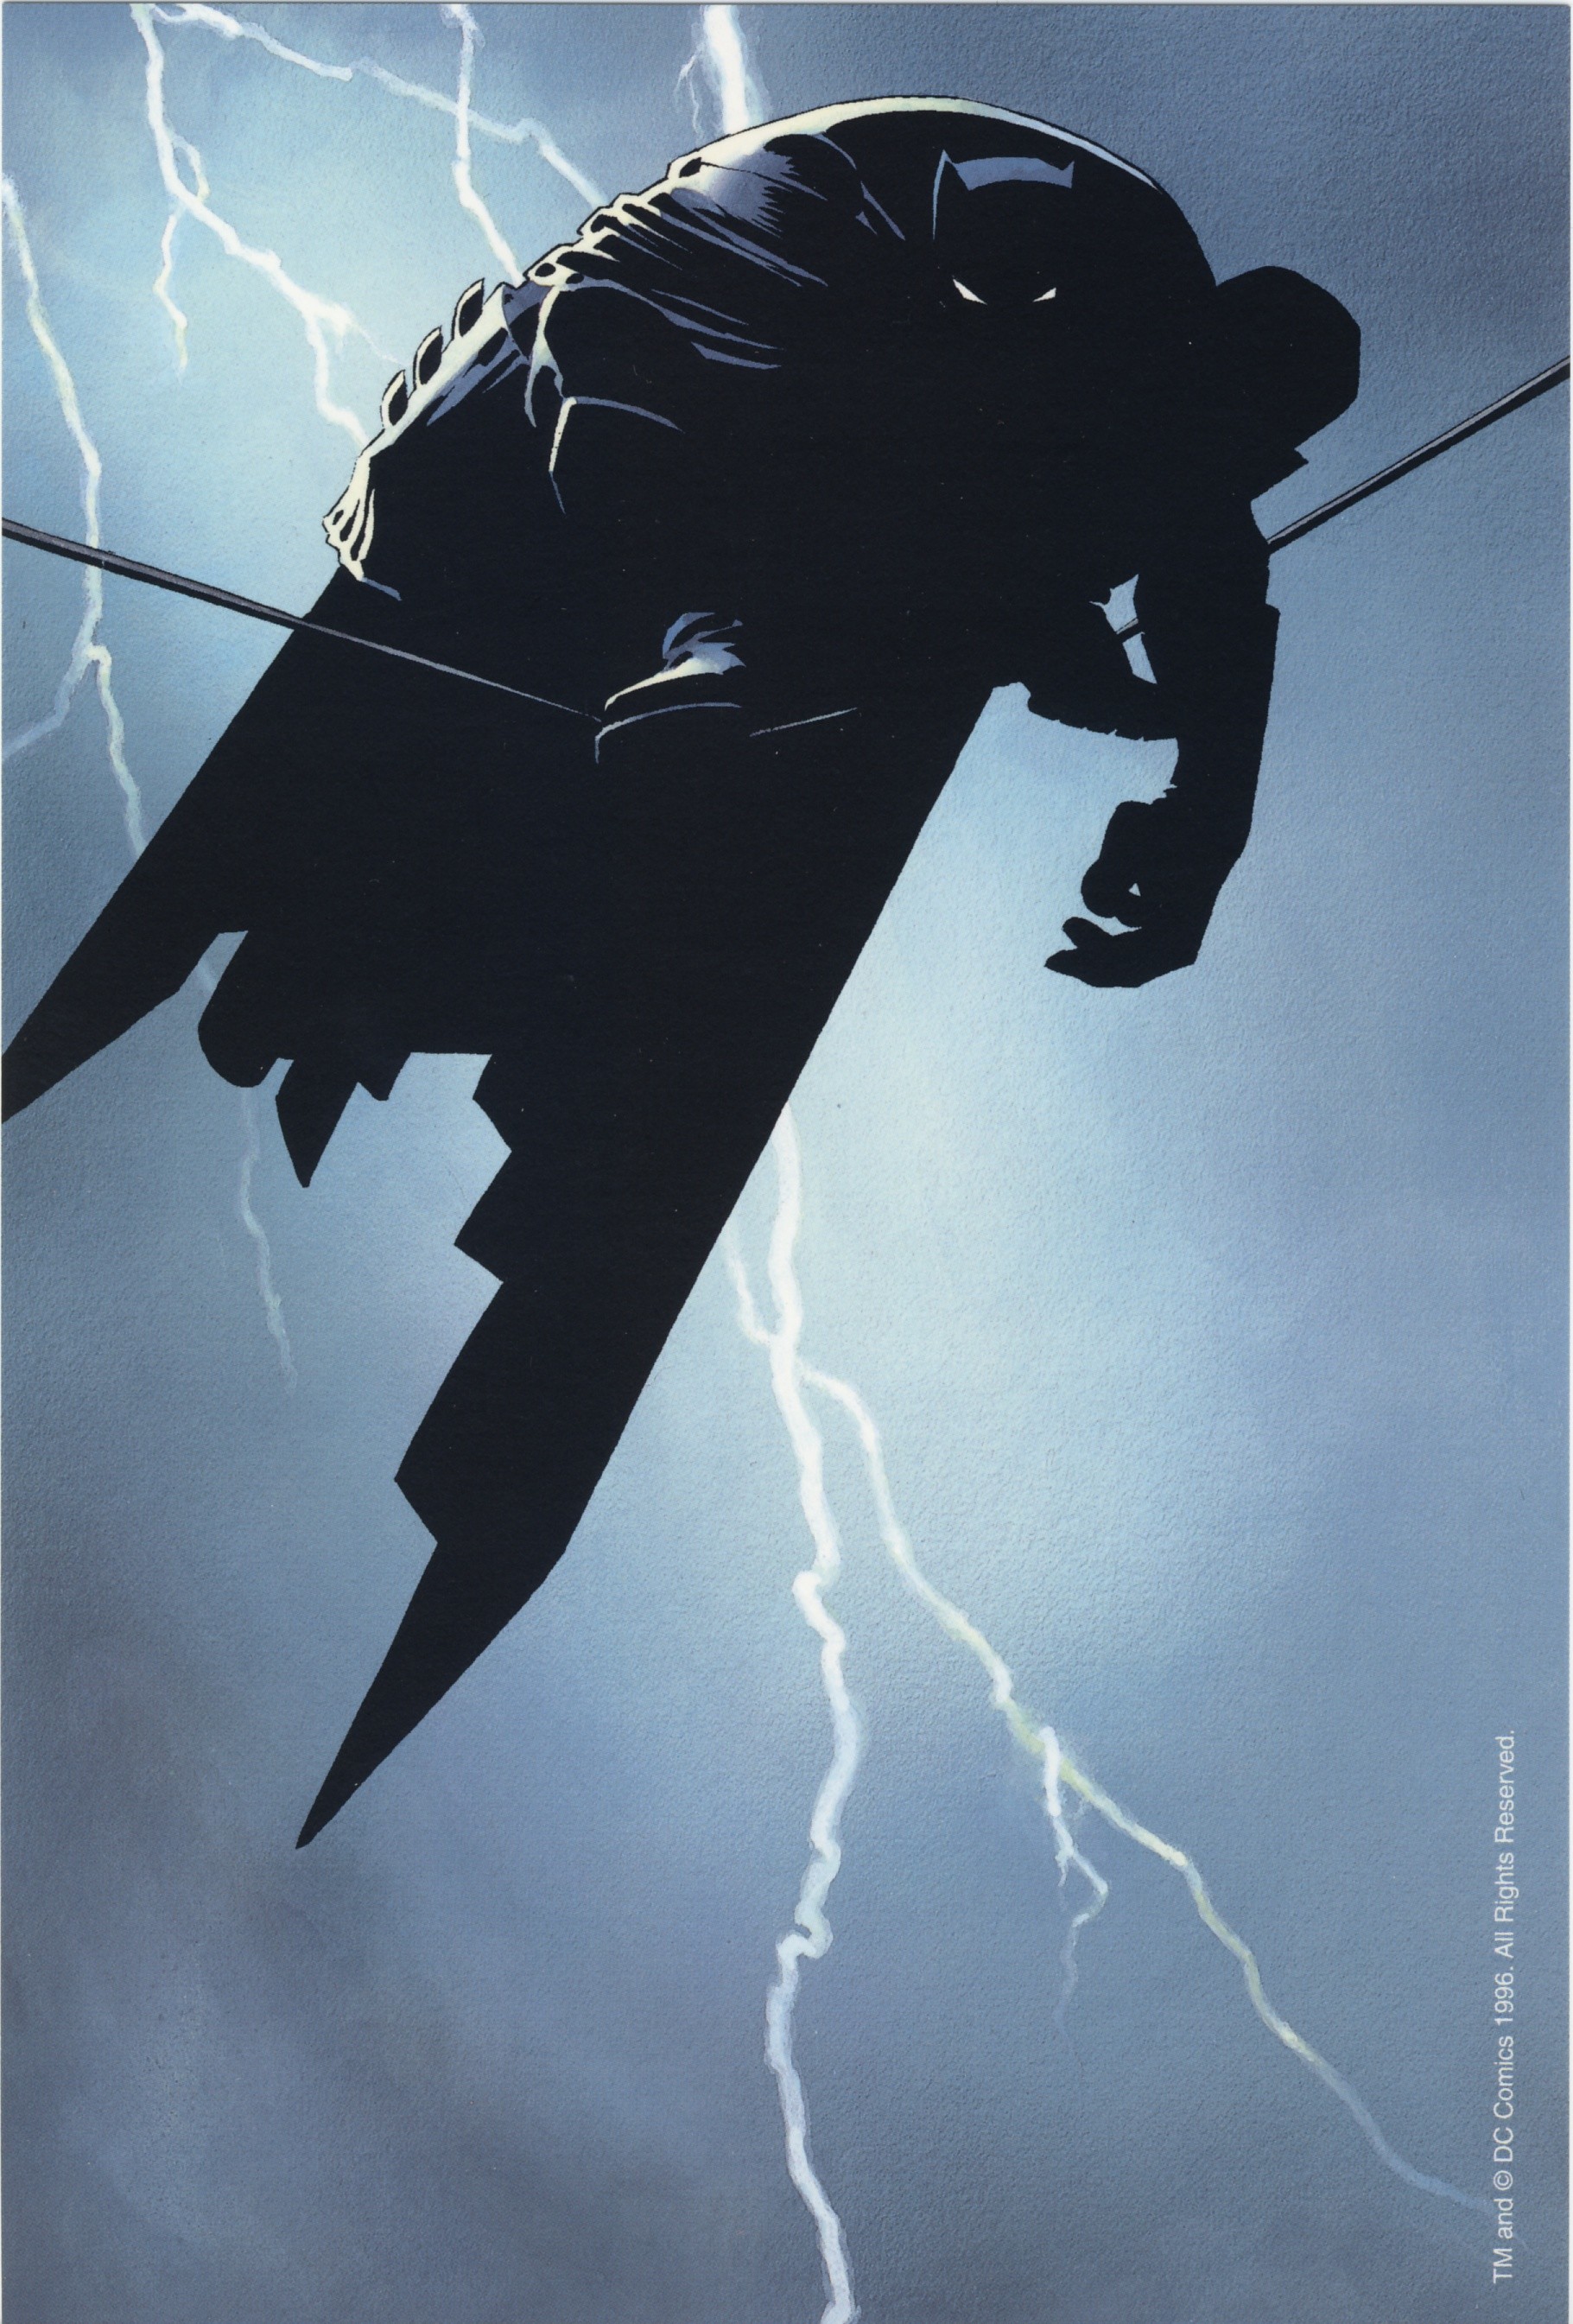 1821x2690 Dark Knight - Frank Miller - this poster got me back into batman after the  terrible movies came out.